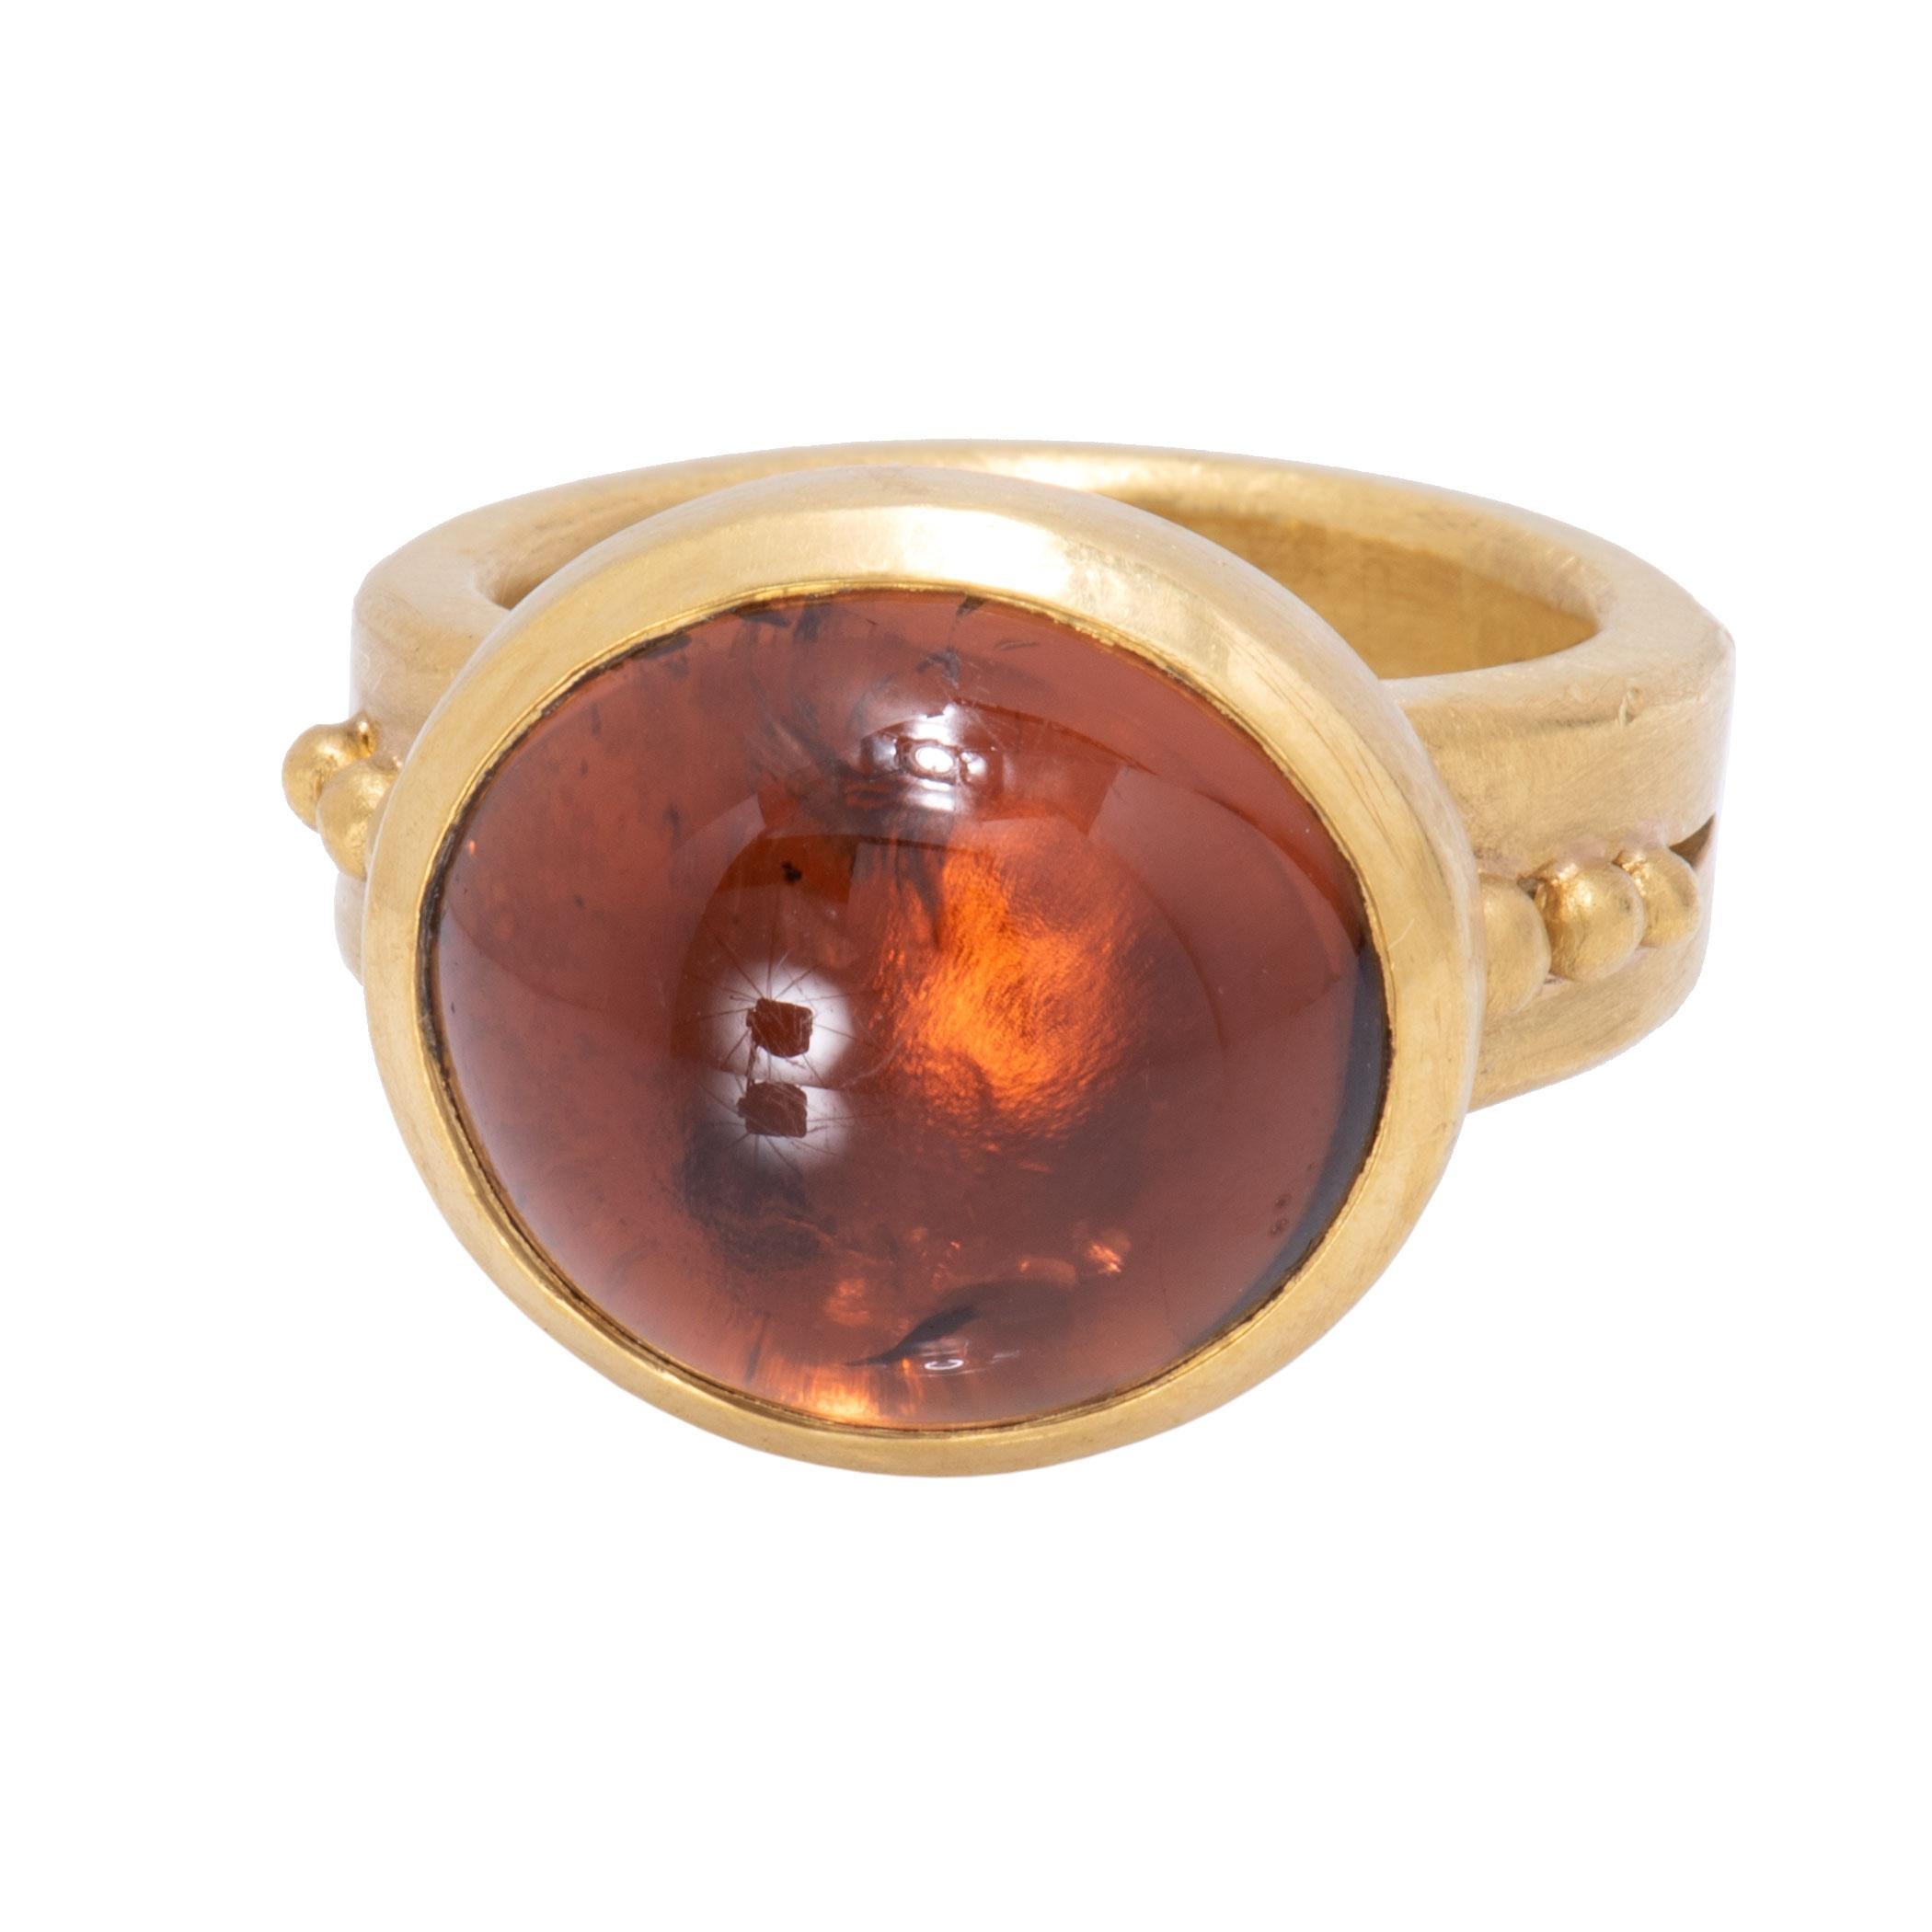 A stunning orange tourmaline cabochon 13.1 carats is bezel set high and wide in this 22 karat gold ring. A fire of lights is reflected from the depths in golds, rust, yellow and deep orange as it turns on the hand. Mounted on a wide, solid band, the